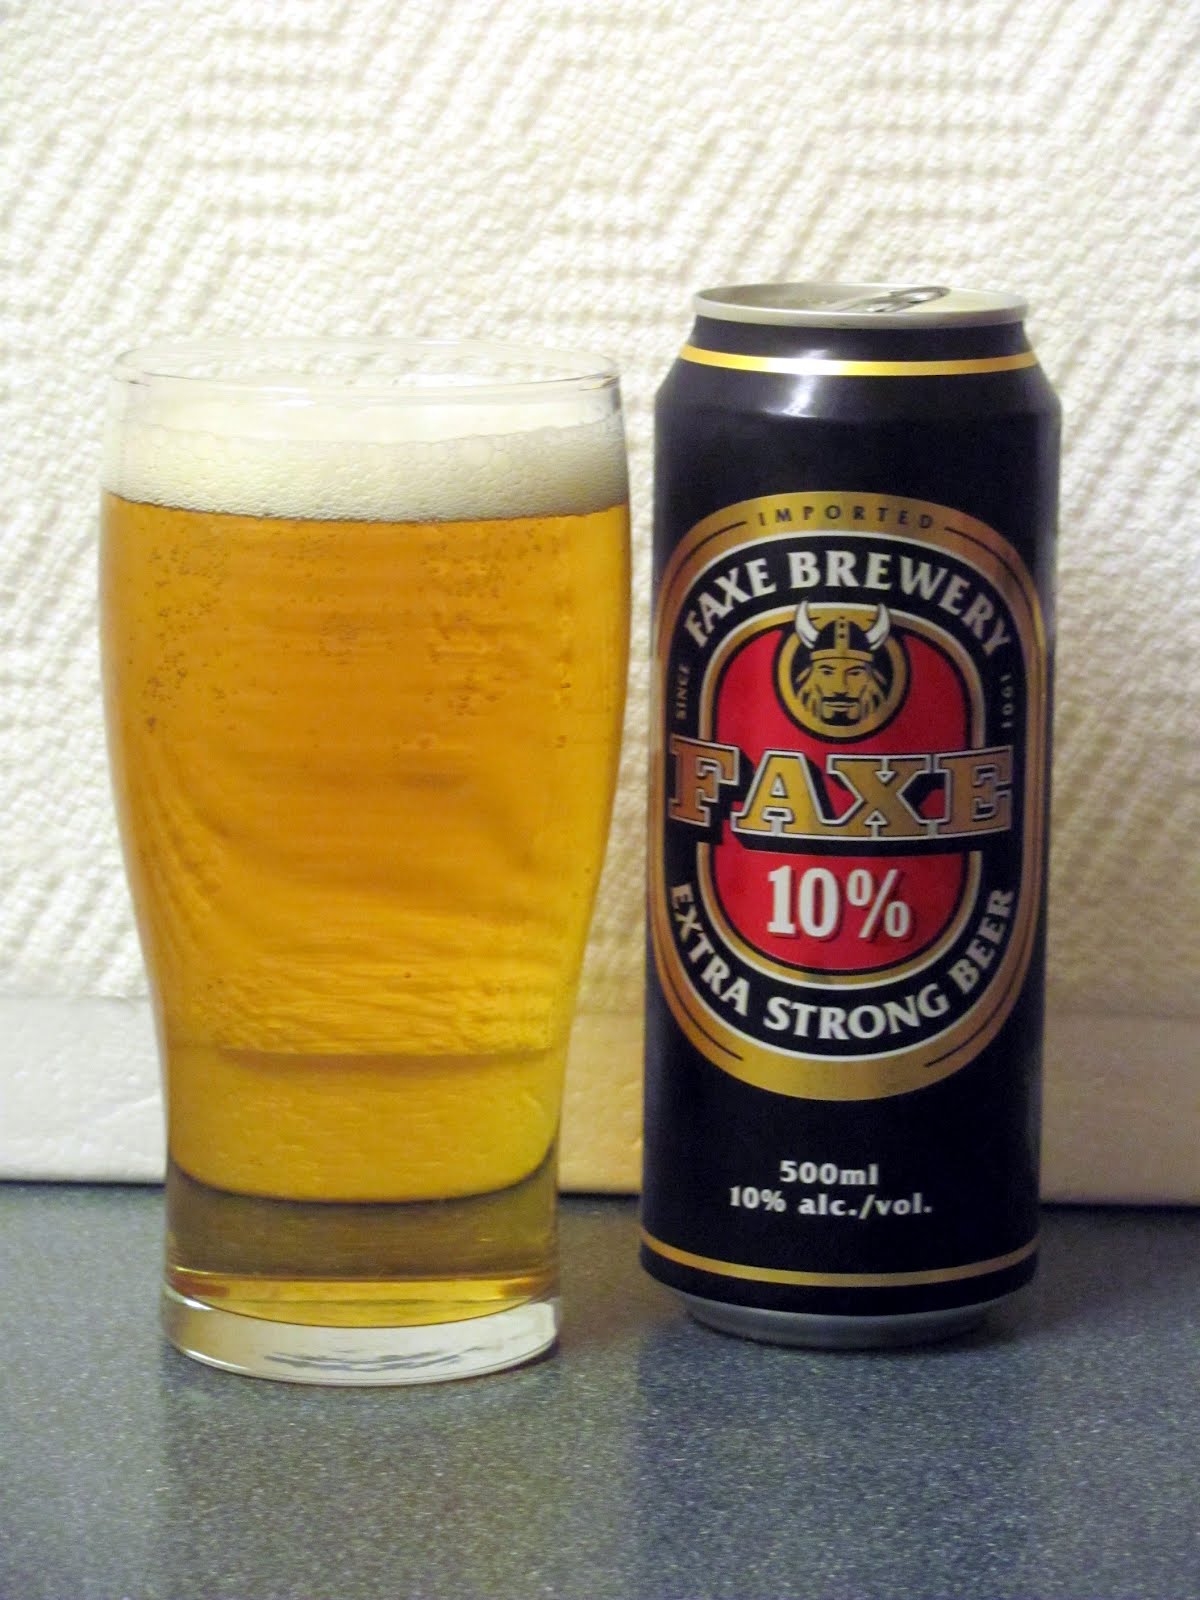 The World of Gord: Beer of the Week - The Beers of Faxe Brewery